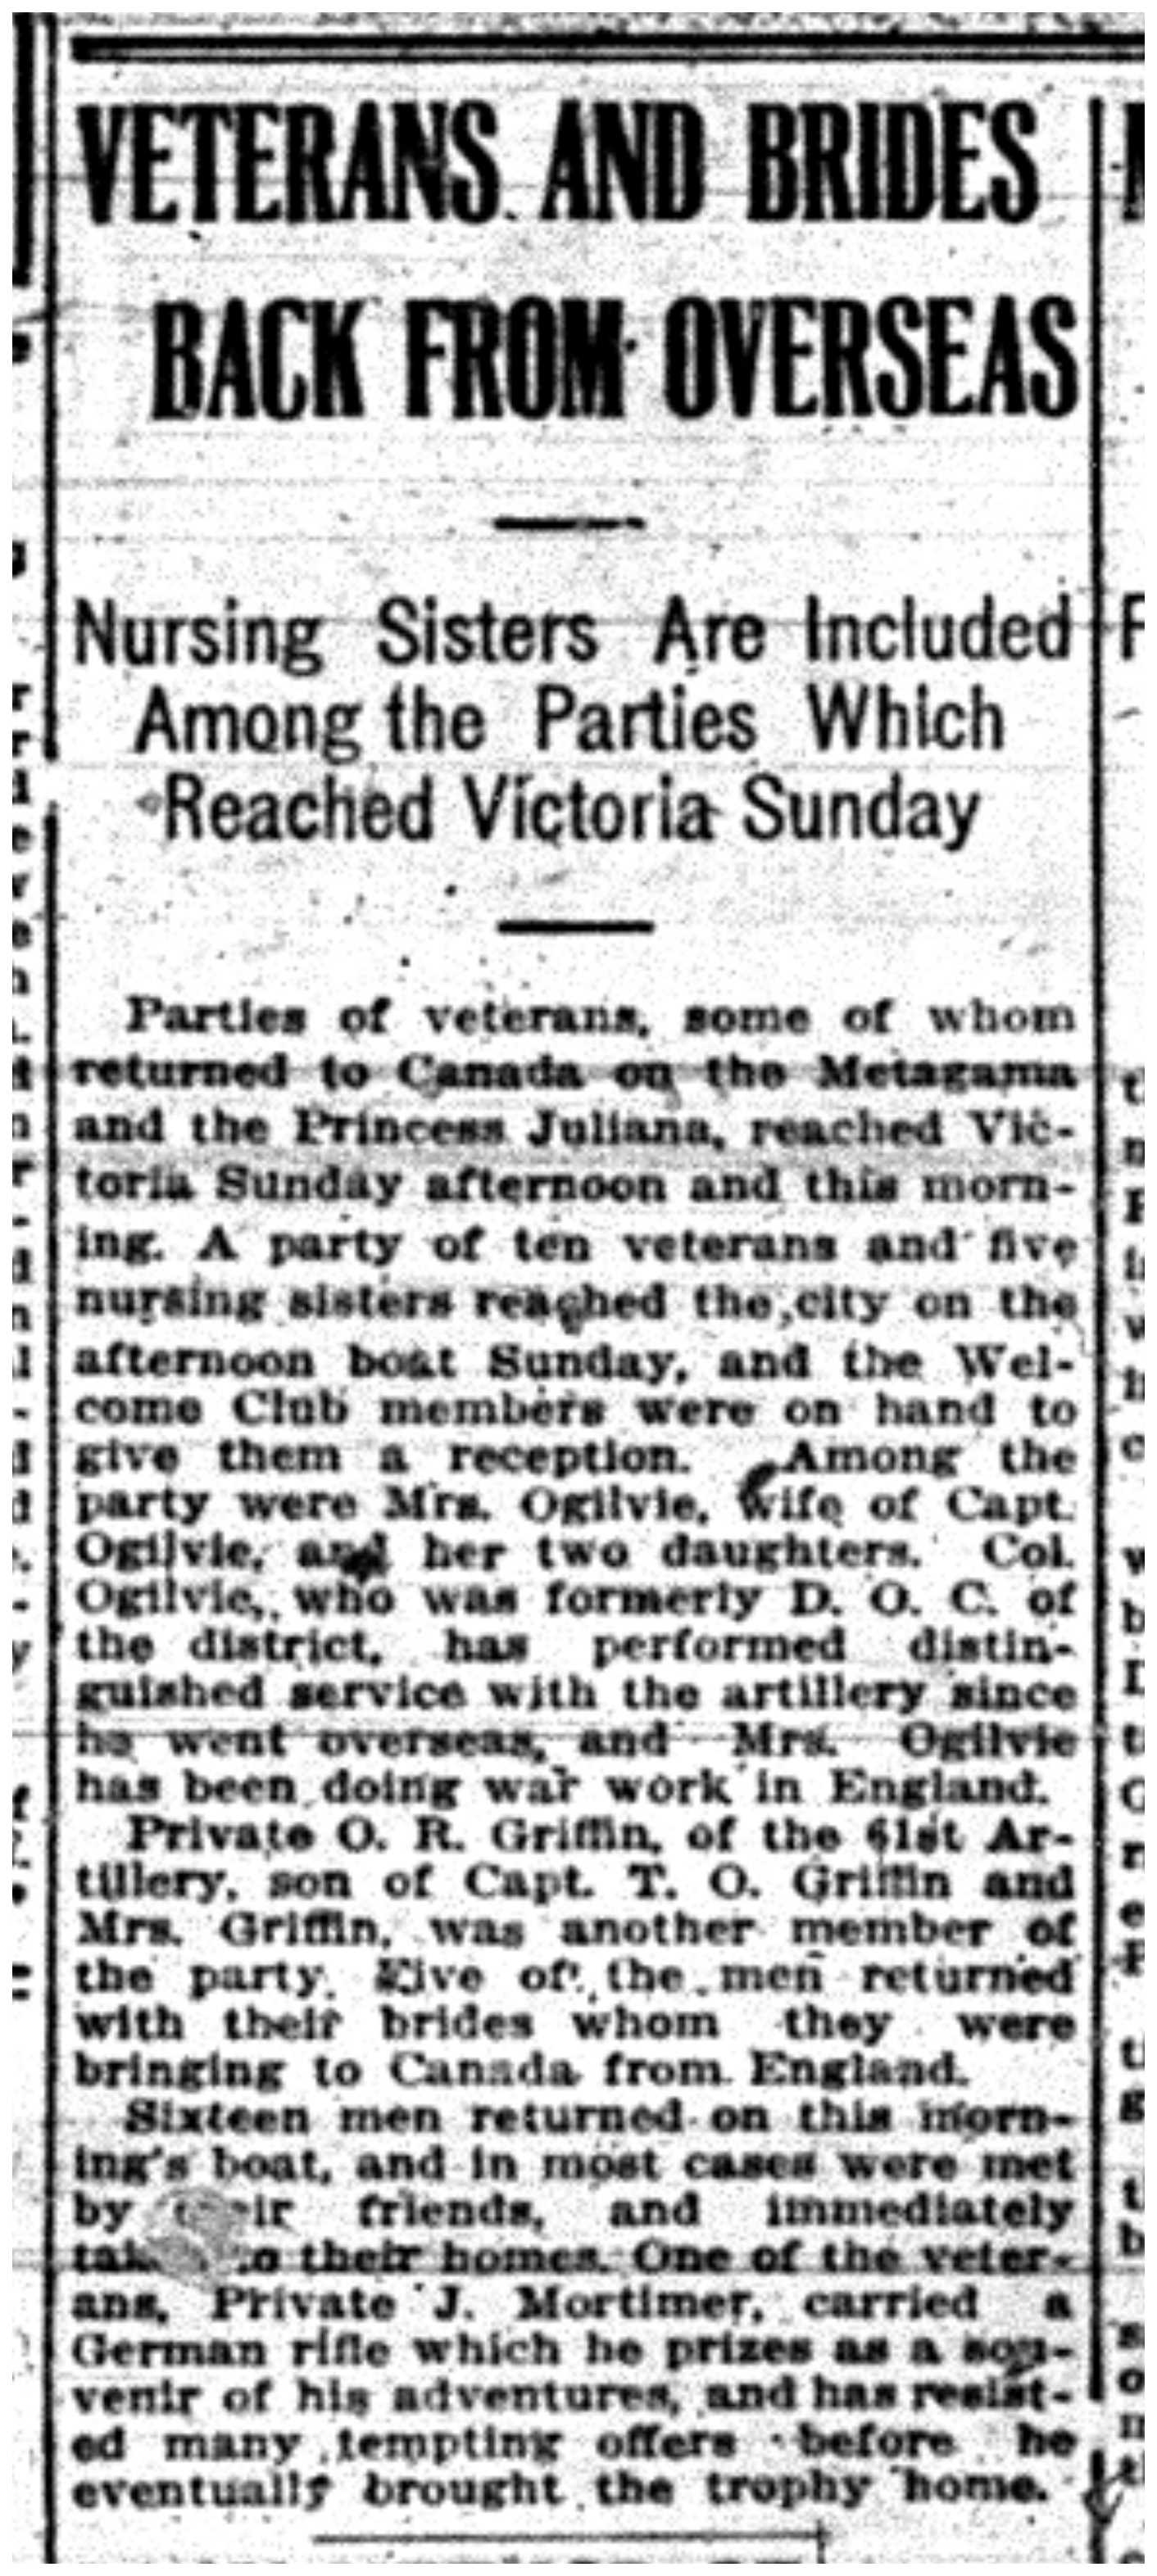 "Veterans and Brides Back from Overseas: Nursing Sisters are Included Among the Parties Which Reached Victoria Sunday"